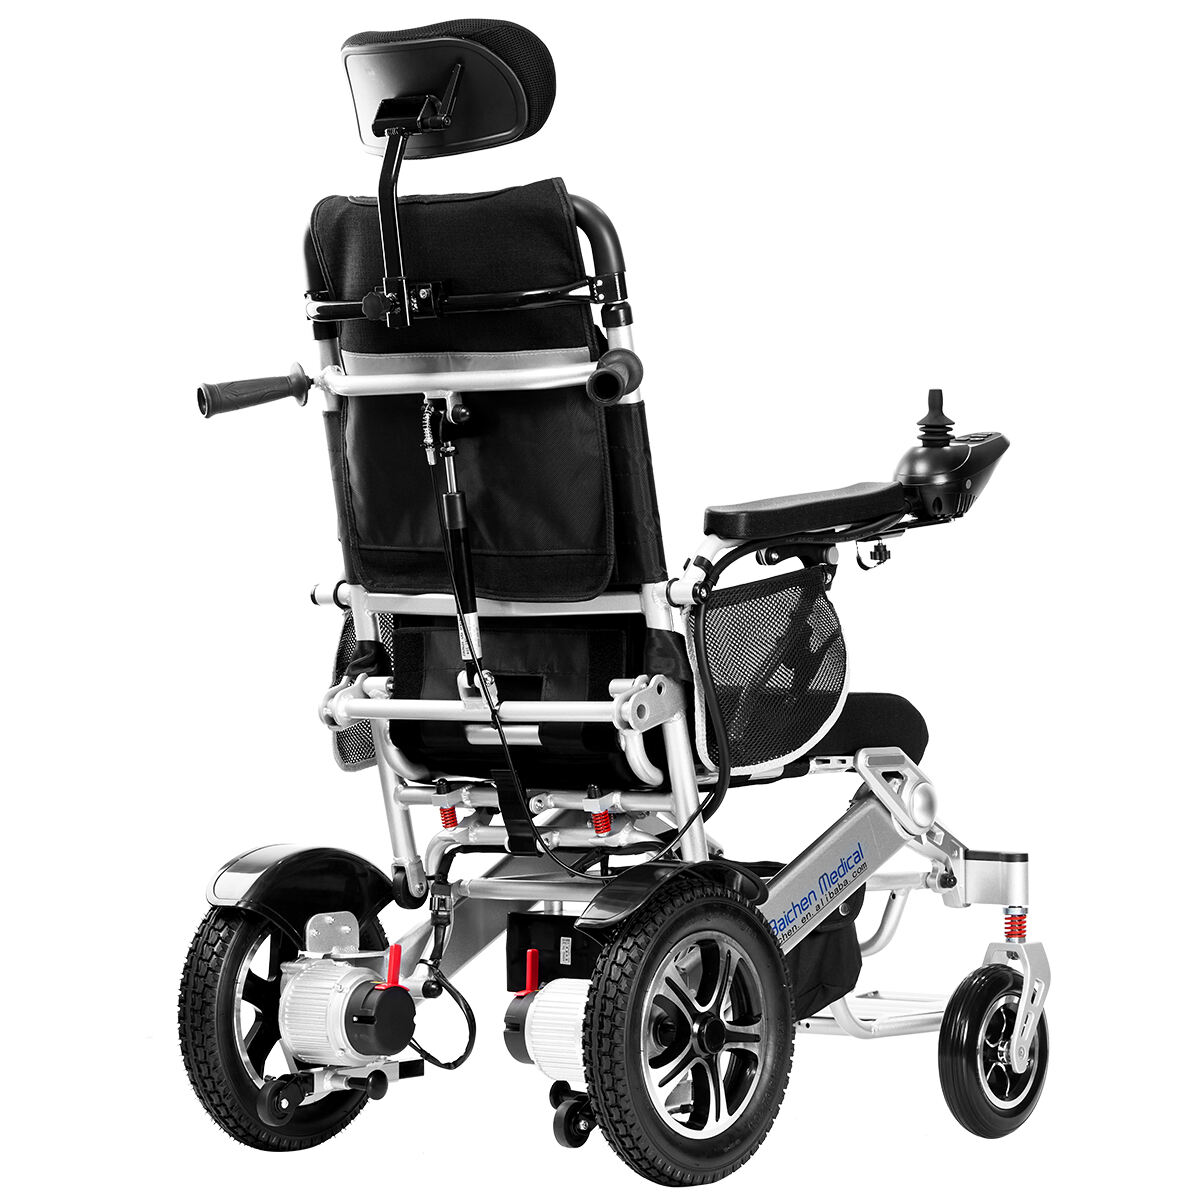 BC-EA9000MR High Backrest Manual Folding Electric Wheelchair for Handicapped